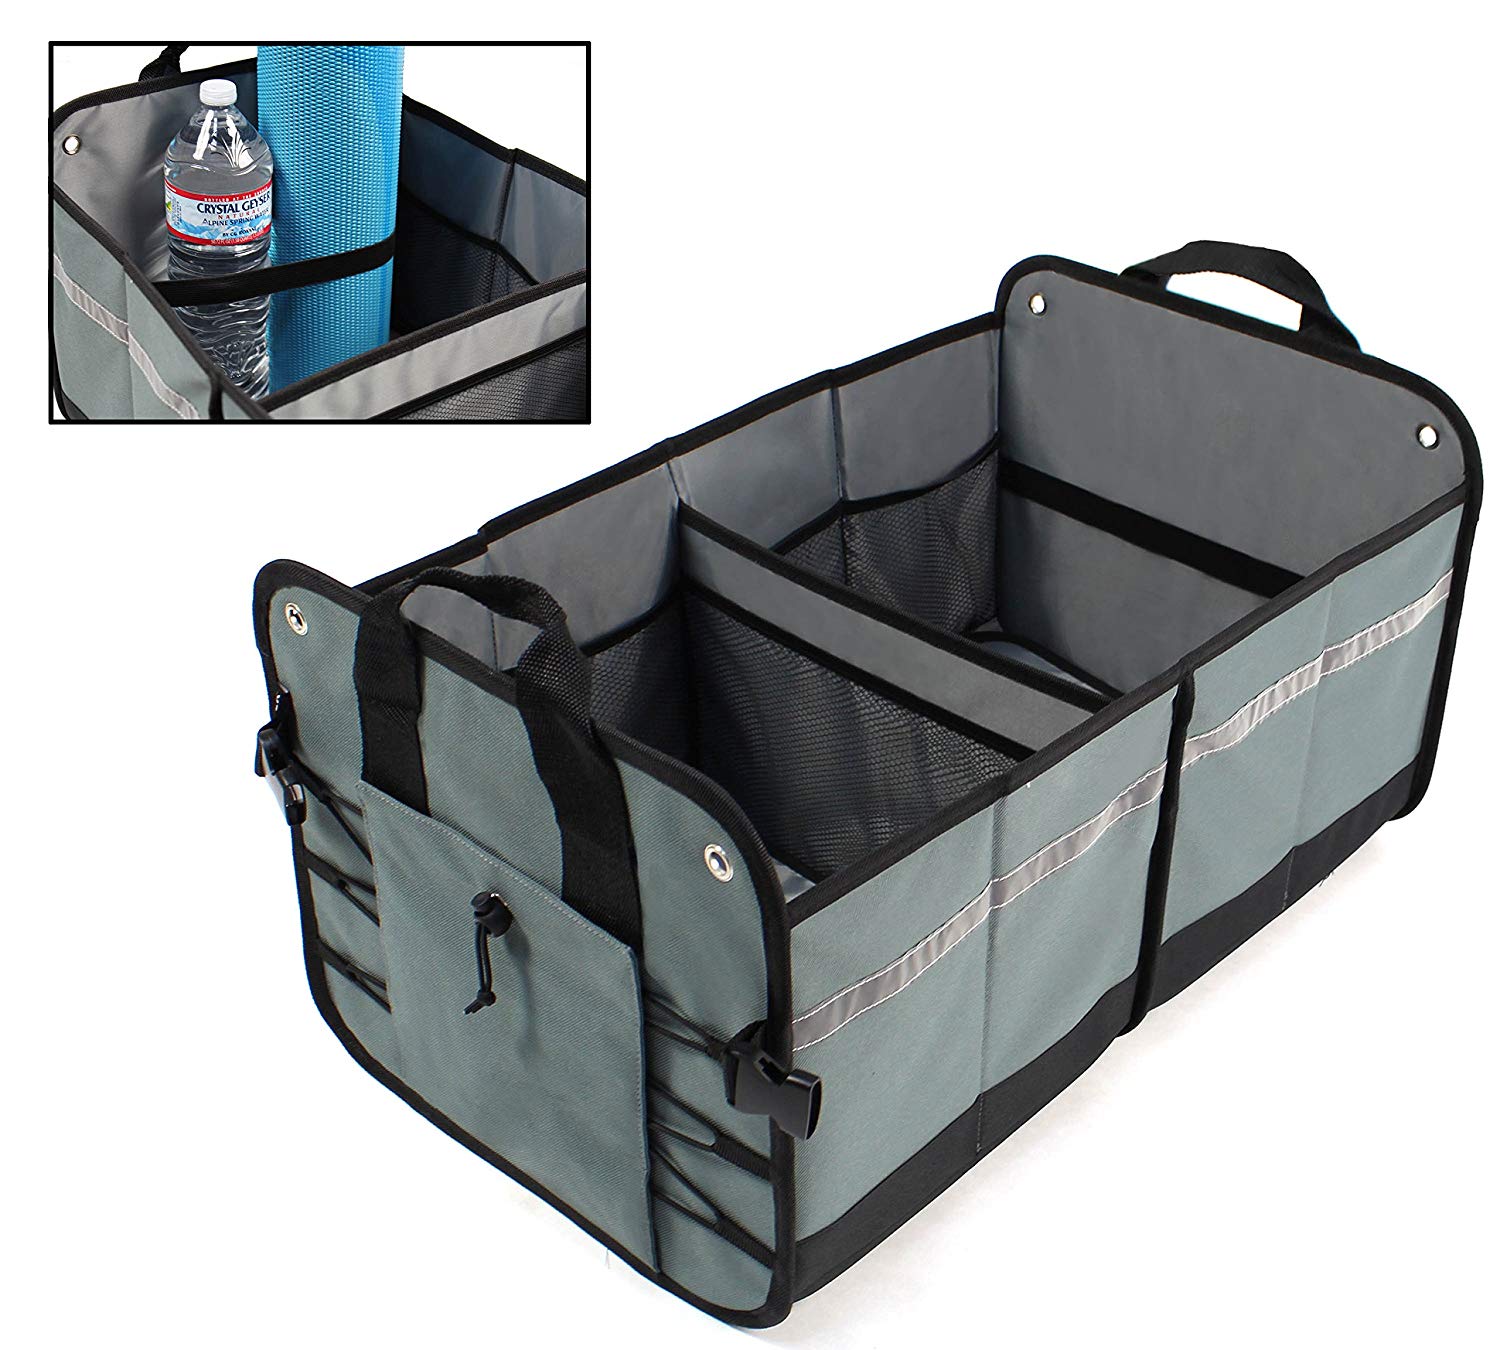 AIOIAI Car Trunk Organizer Cargo Container for your Auto SUV Minivan Car and Truck Collapsible Foldable for Easy Storage